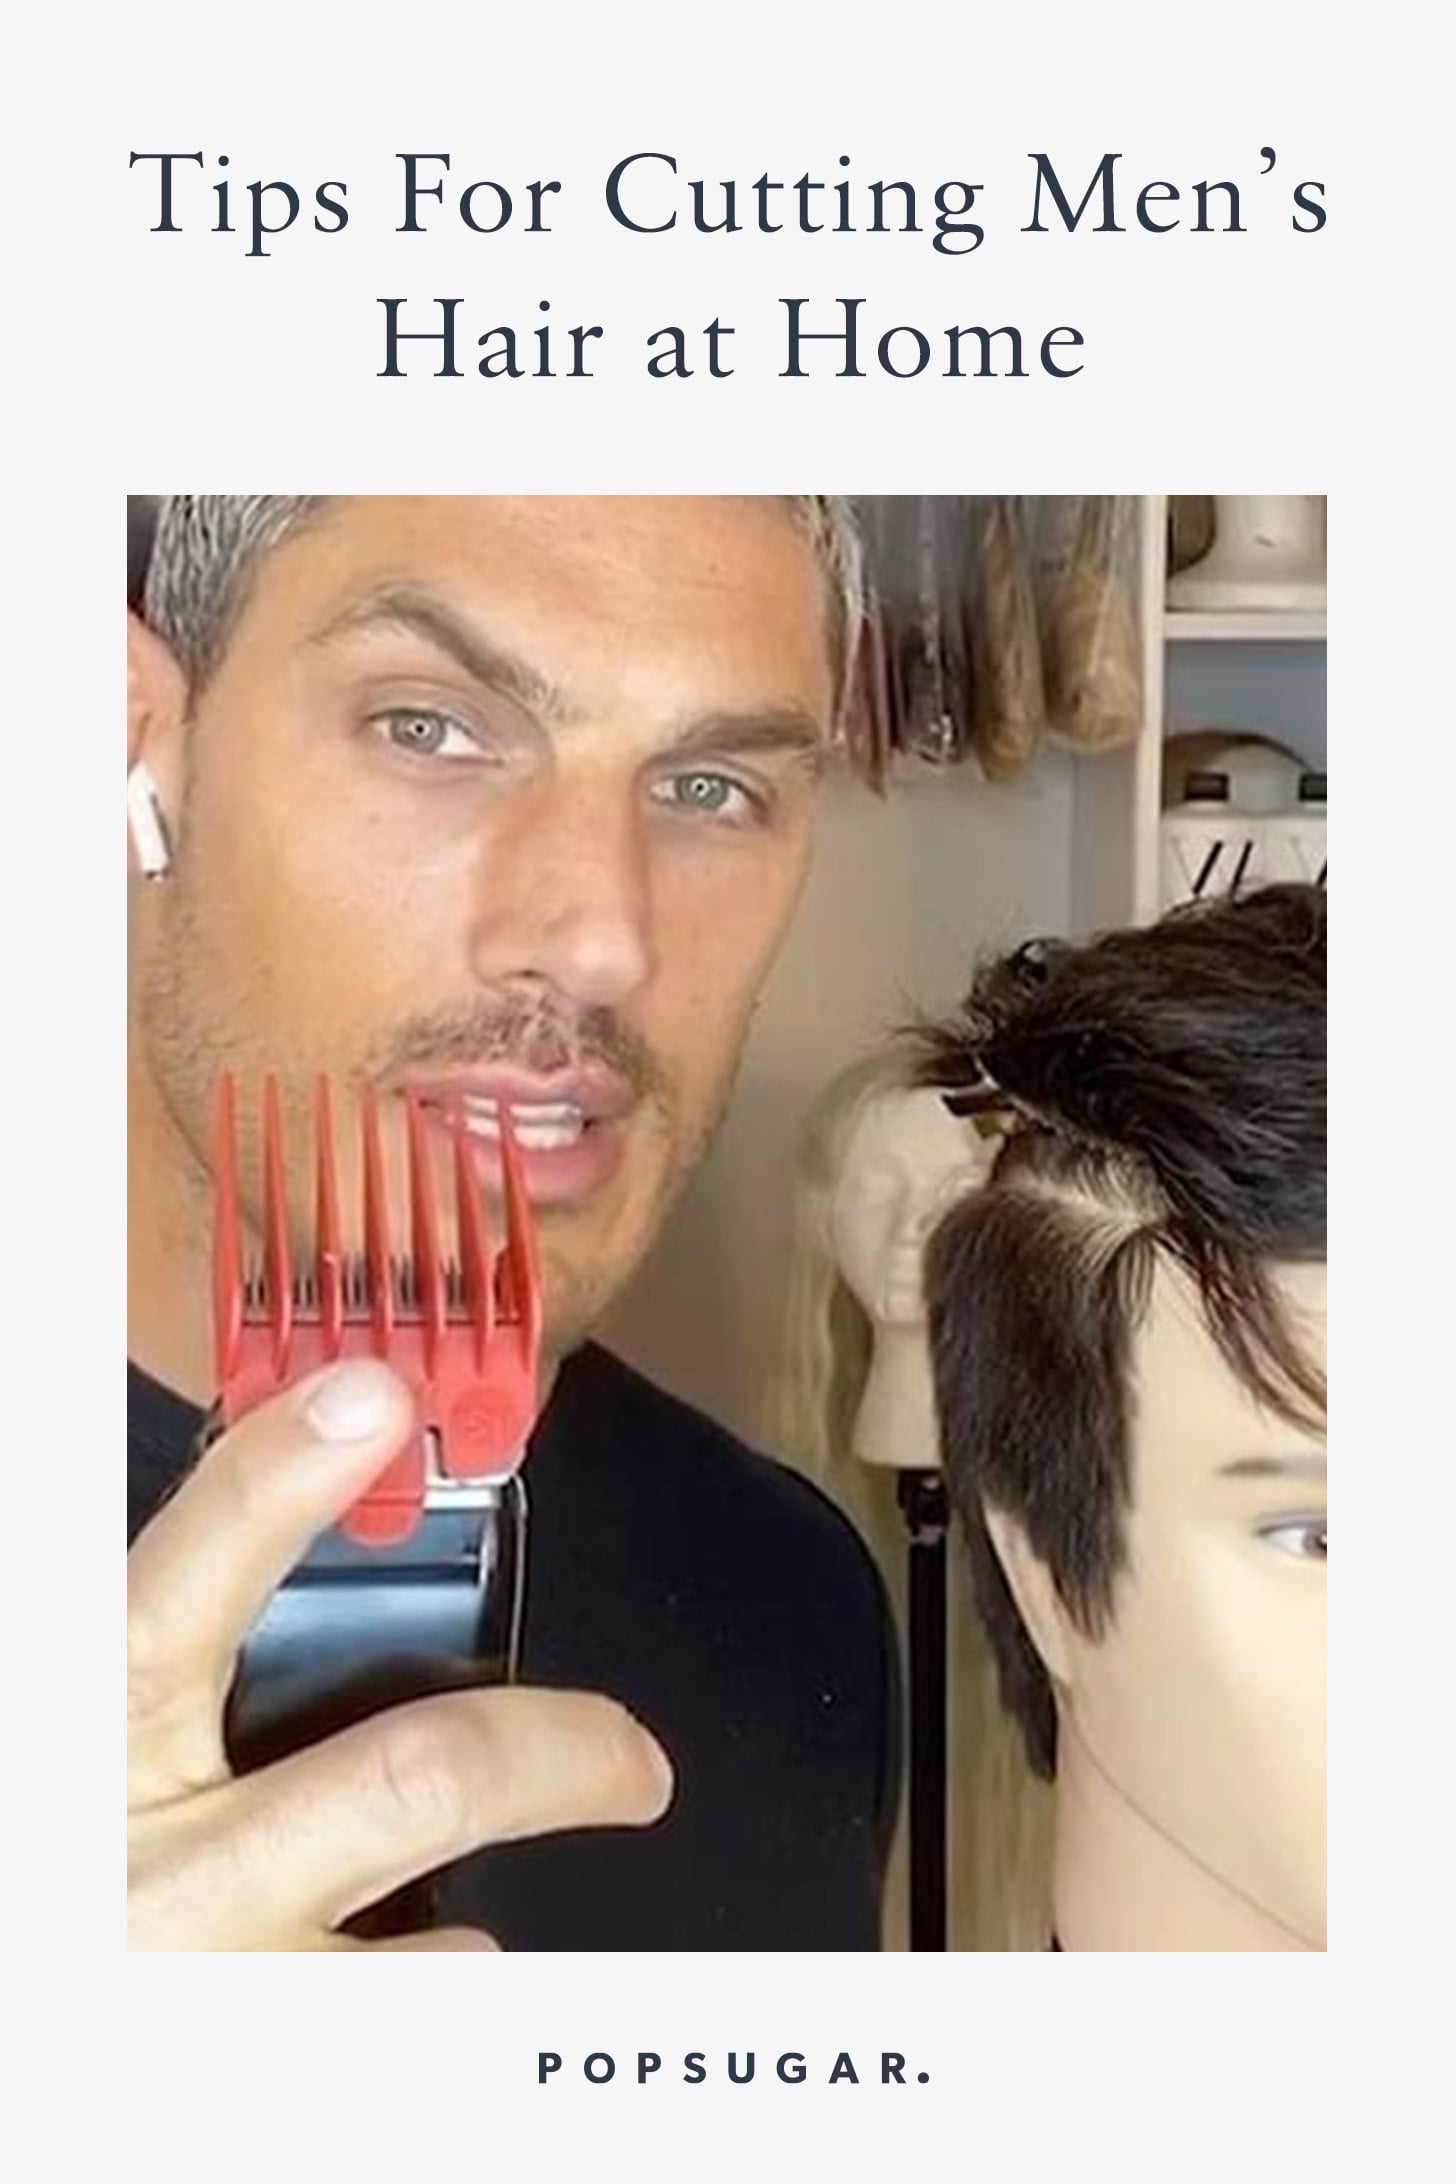 Hairstylist's Tips For Cutting Men's Hair at Home | POPSUGAR Beauty